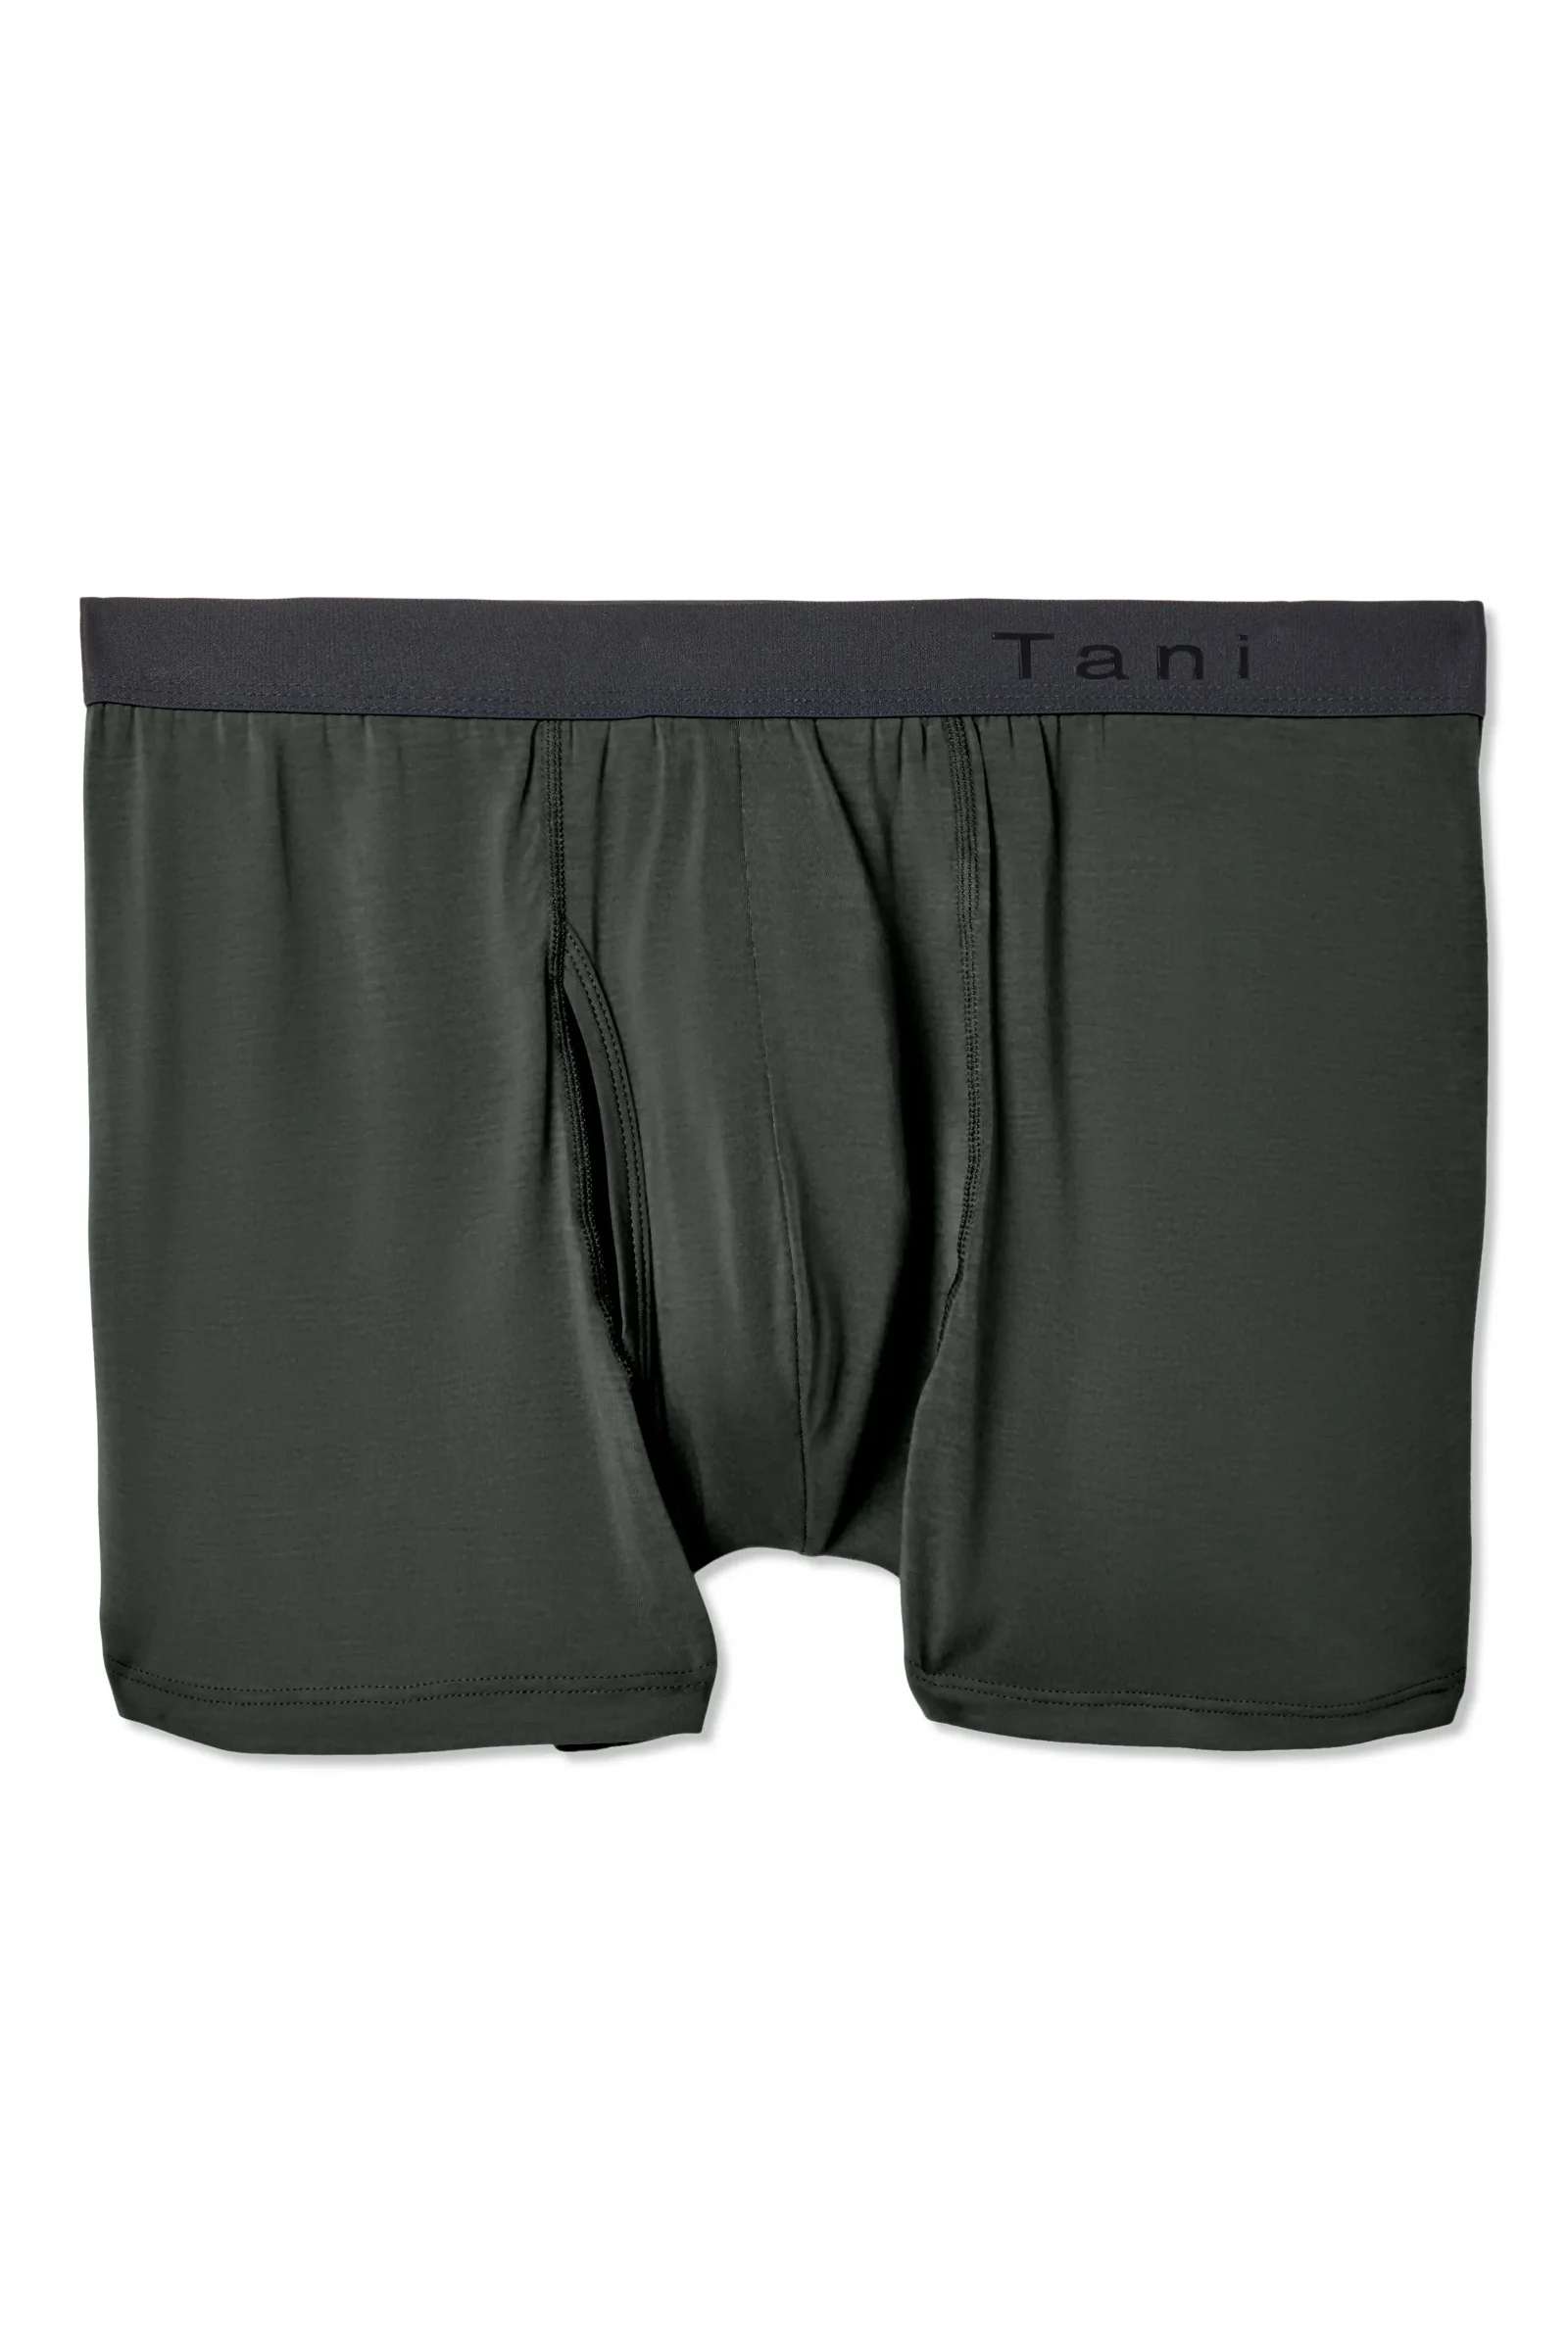 Image of Hybrid Boxer Brief with Pouch